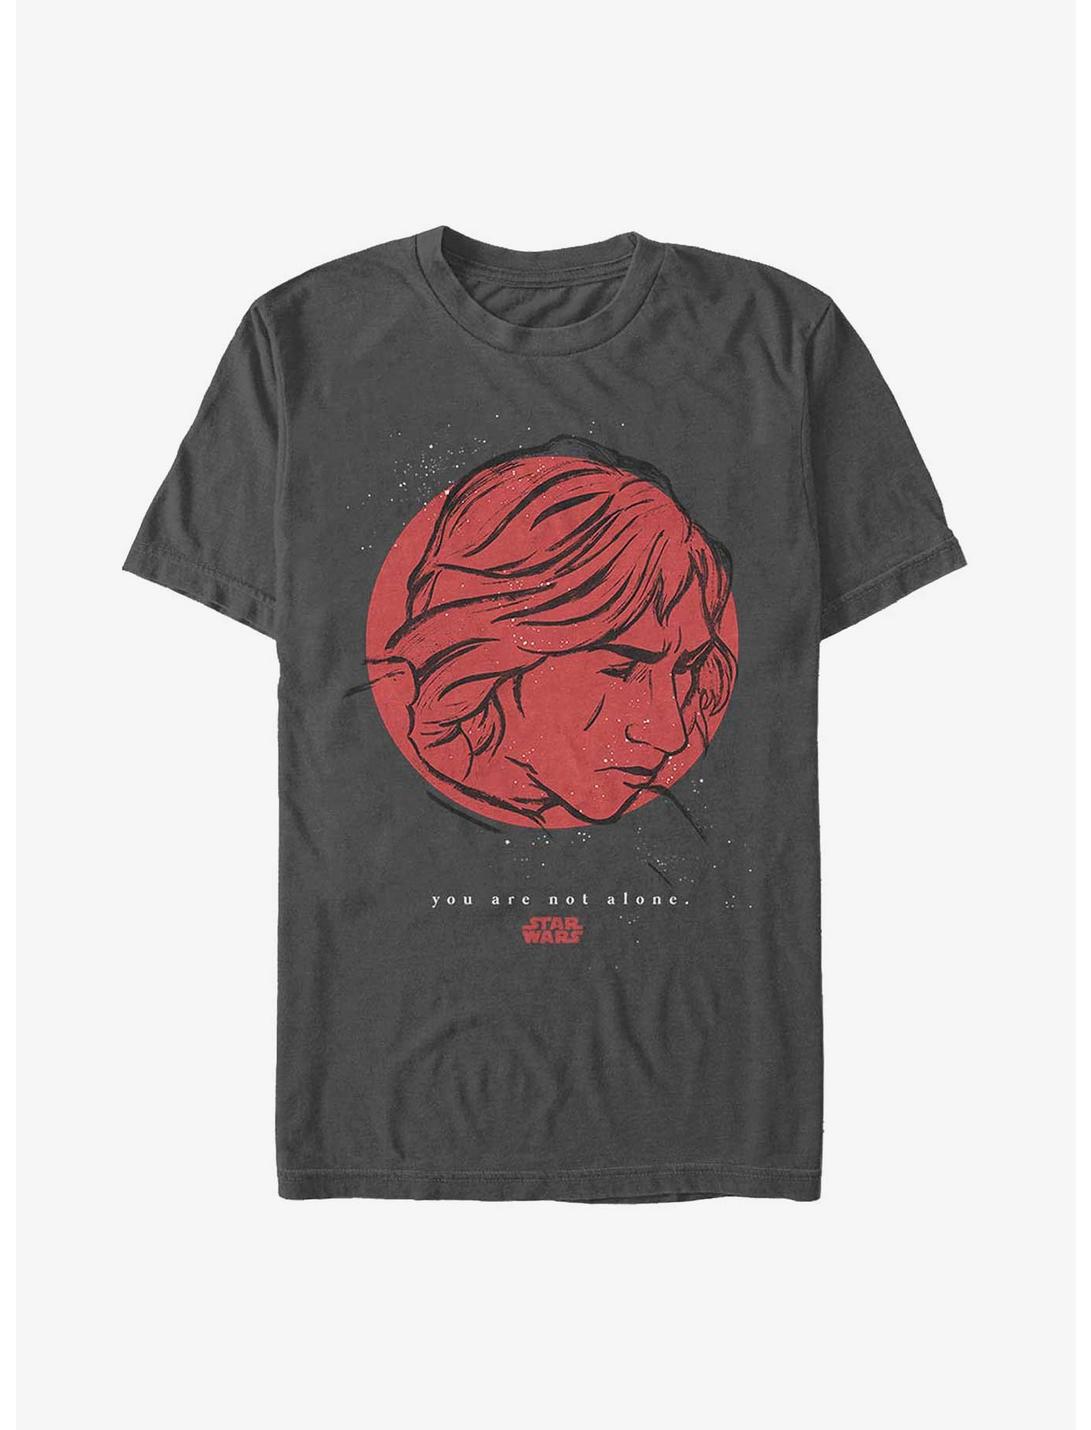 Star Wars: Episode VIII - The Last Jedi Kylo Ren You Are Not Alone T-Shirt, CHARCOAL, hi-res